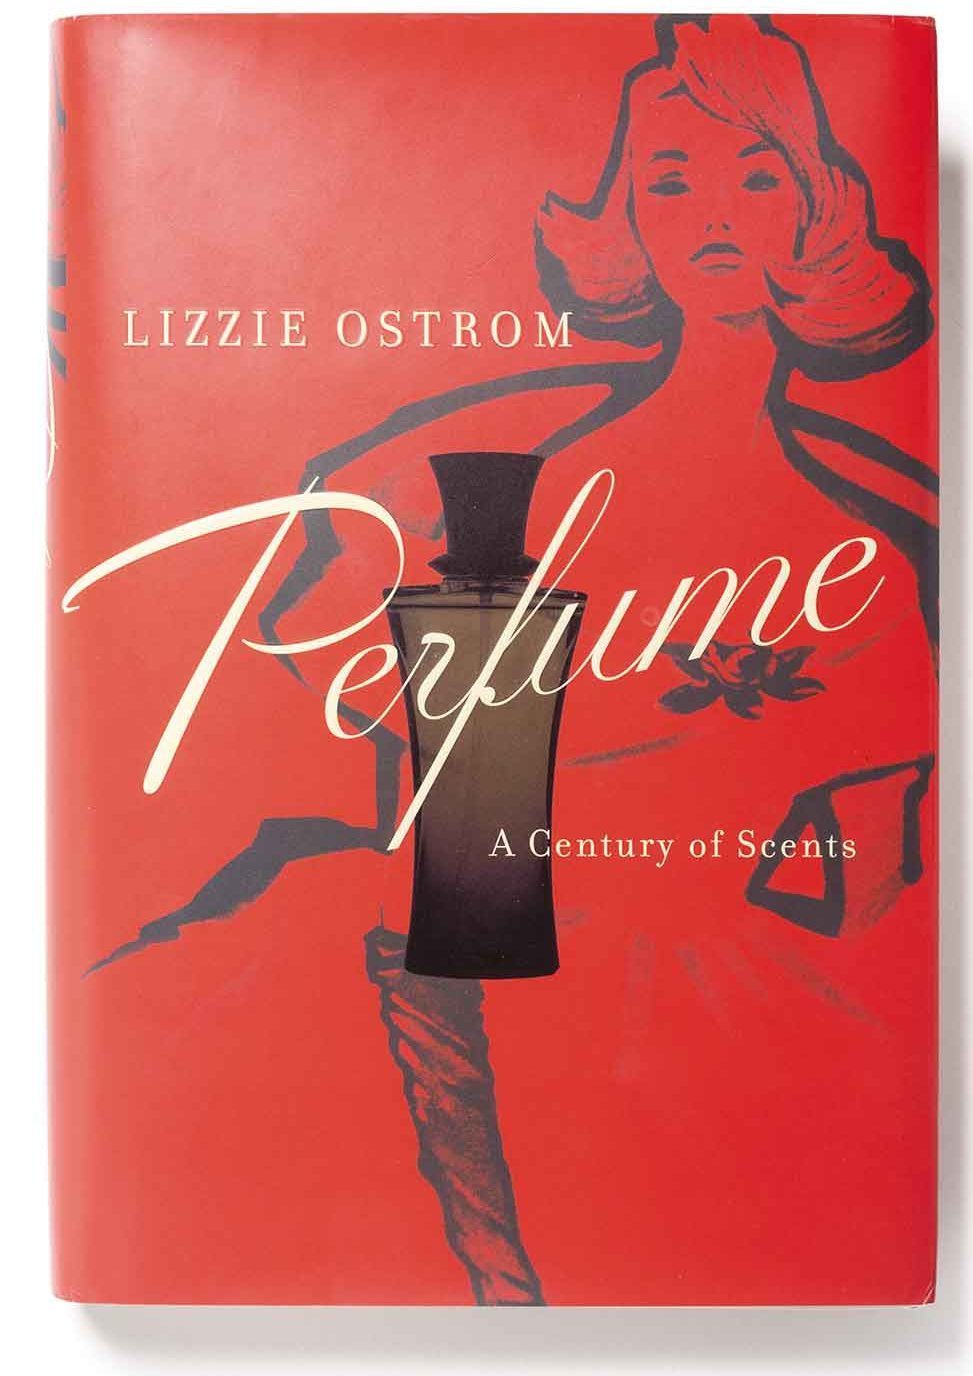 Perfume – a Century of Scents  – Lizzie Ostrom